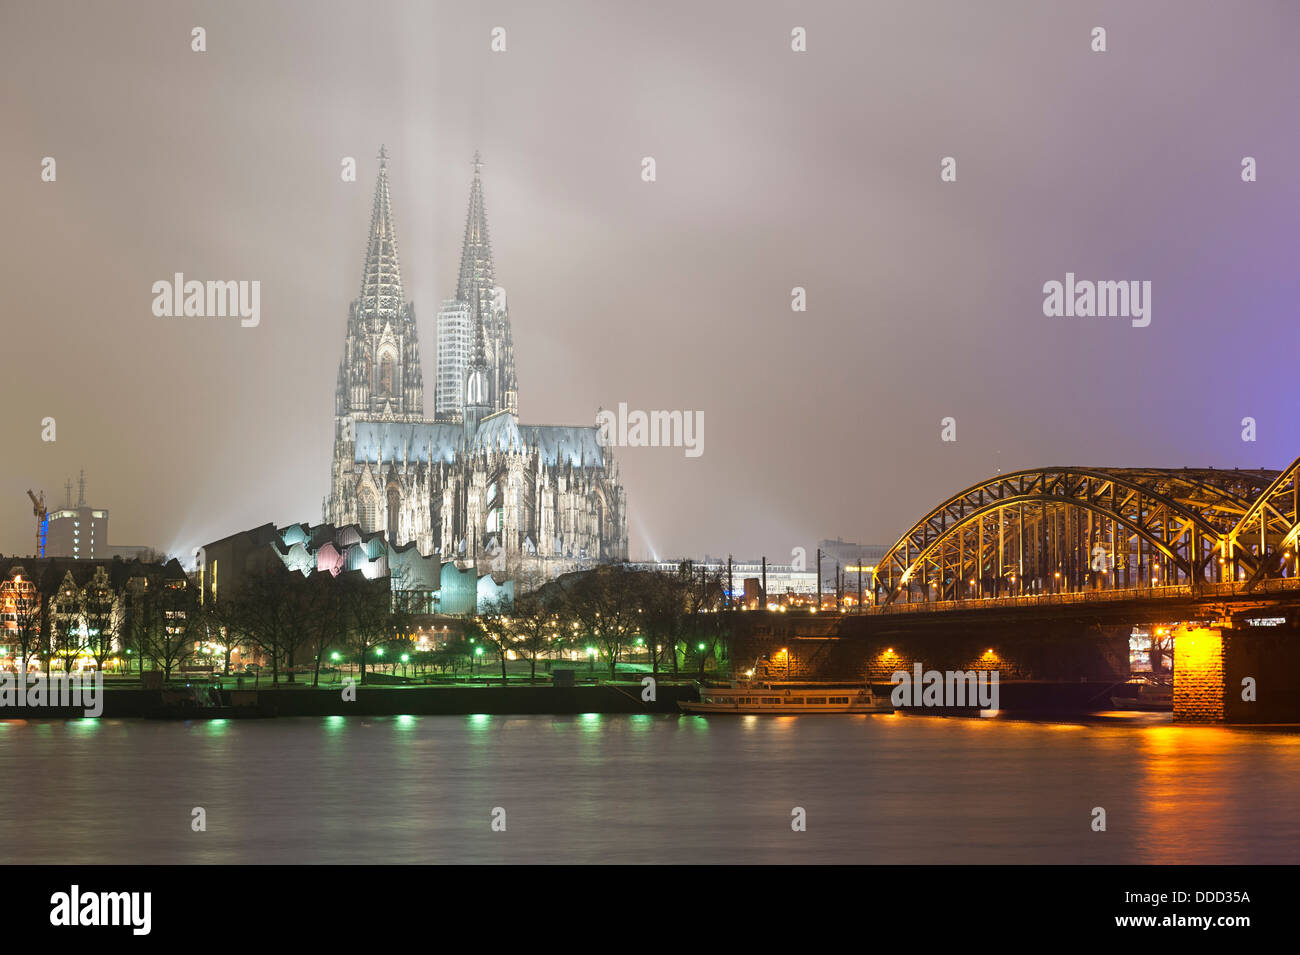 Cologne Cathedral at night Stock Photo